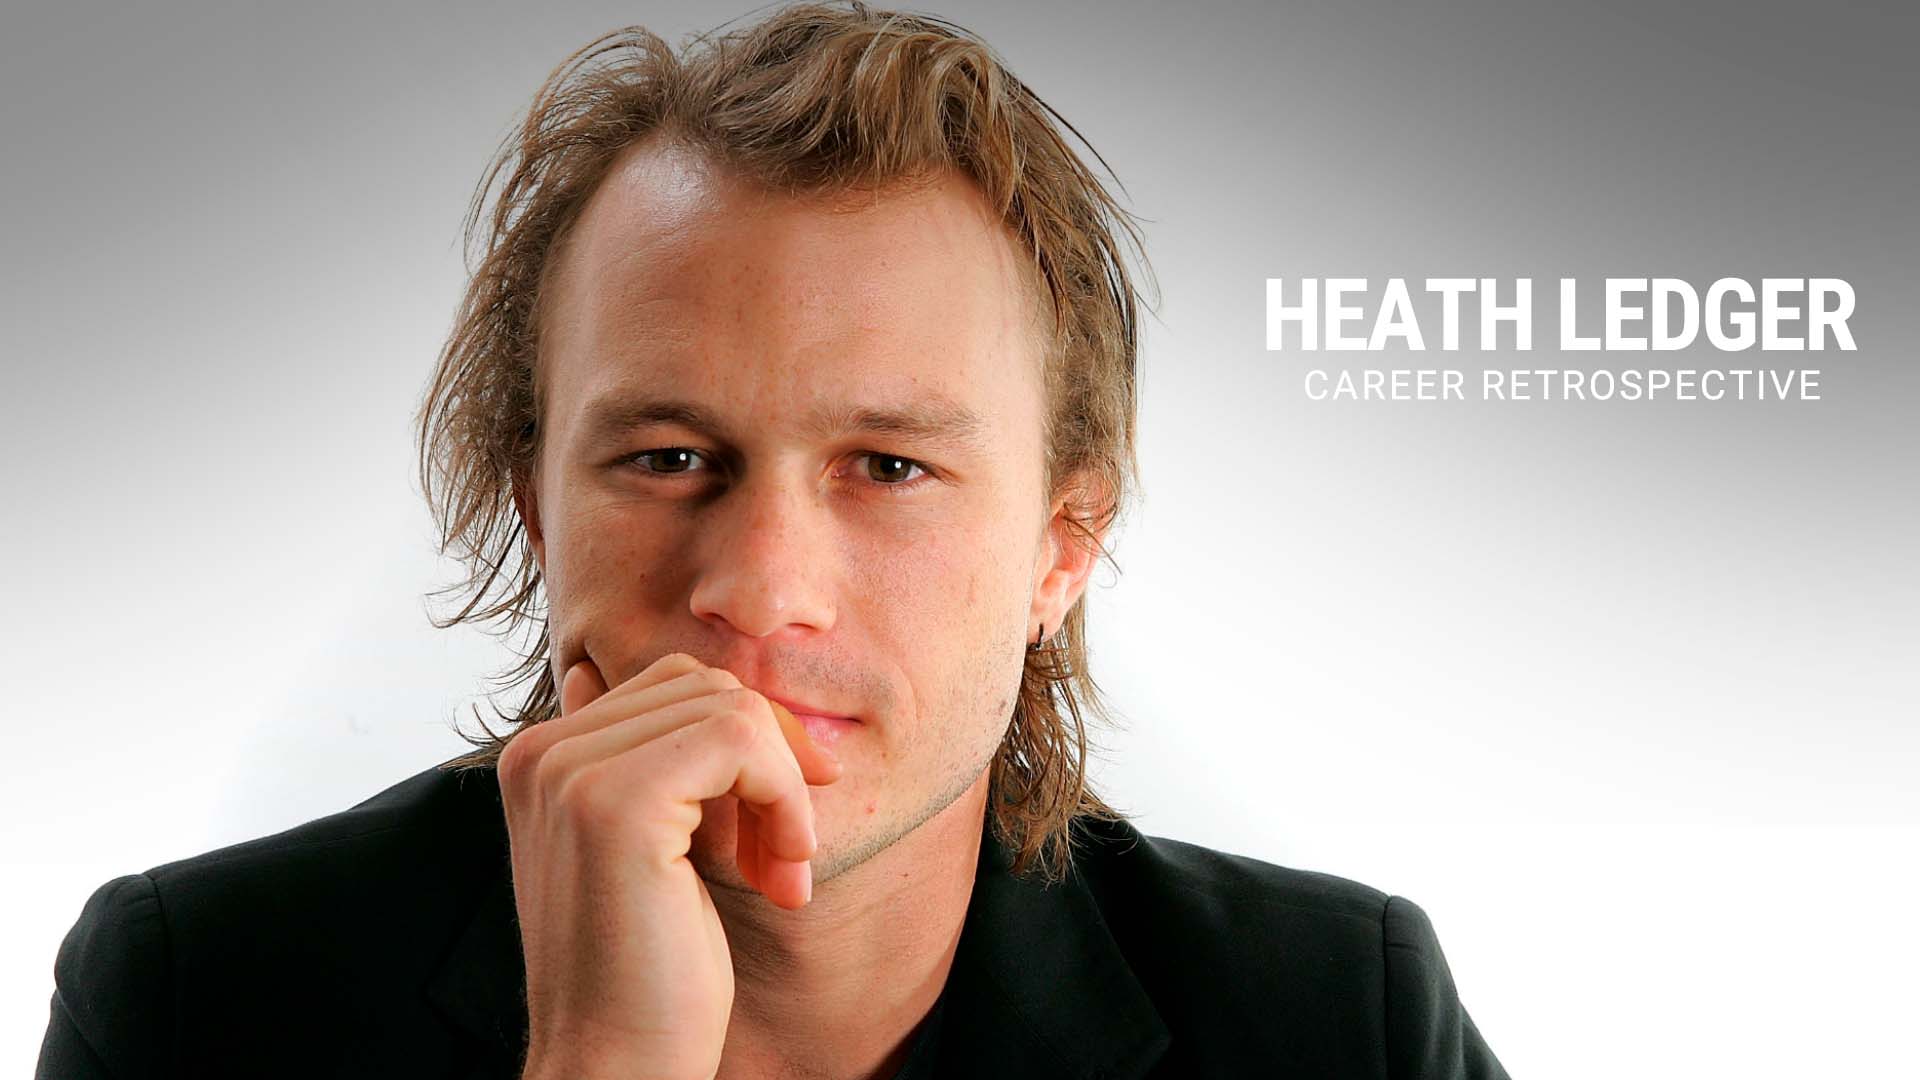 Heath Ledger’s death: New details revealed by Hollywood director - NZ Herald